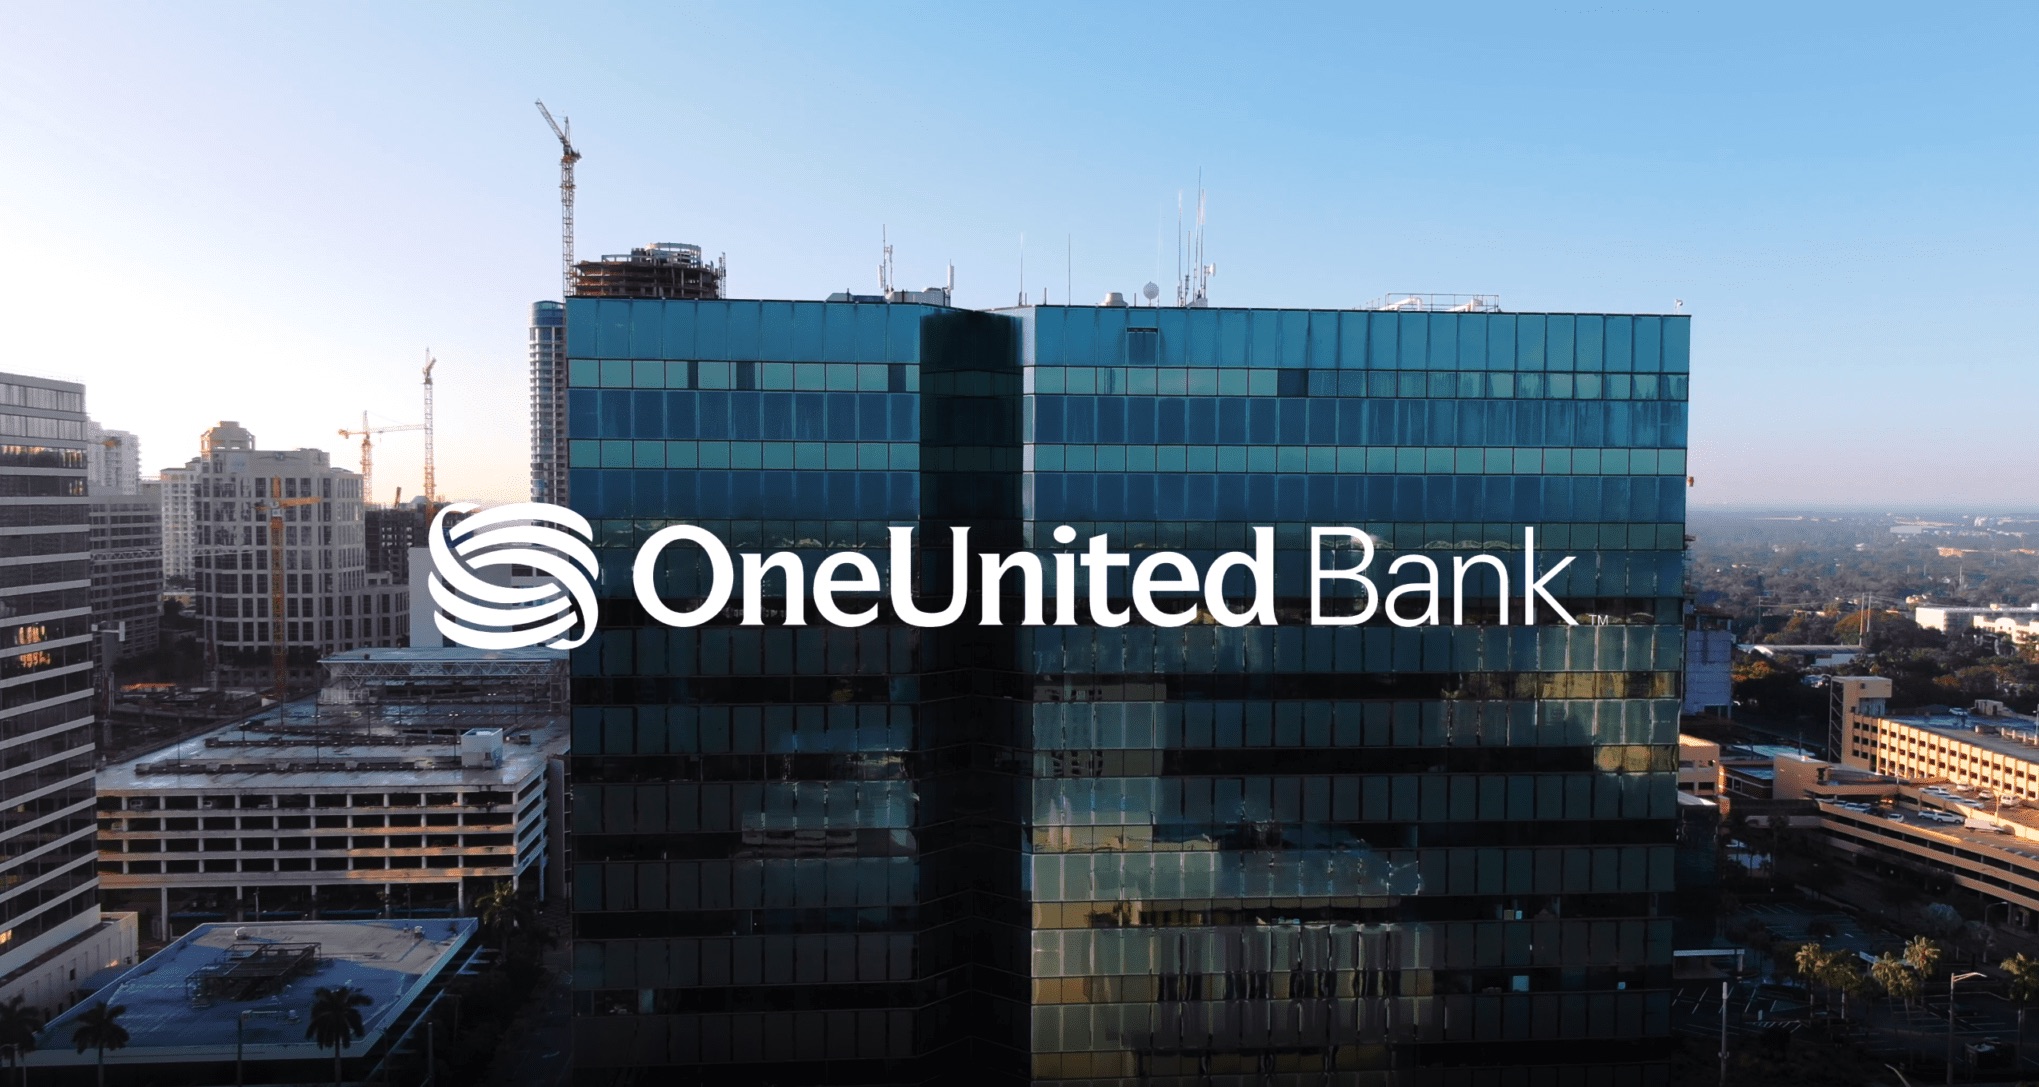 Audio Services by C&I Studios White One United Bank logo against a backdrop of building in the city